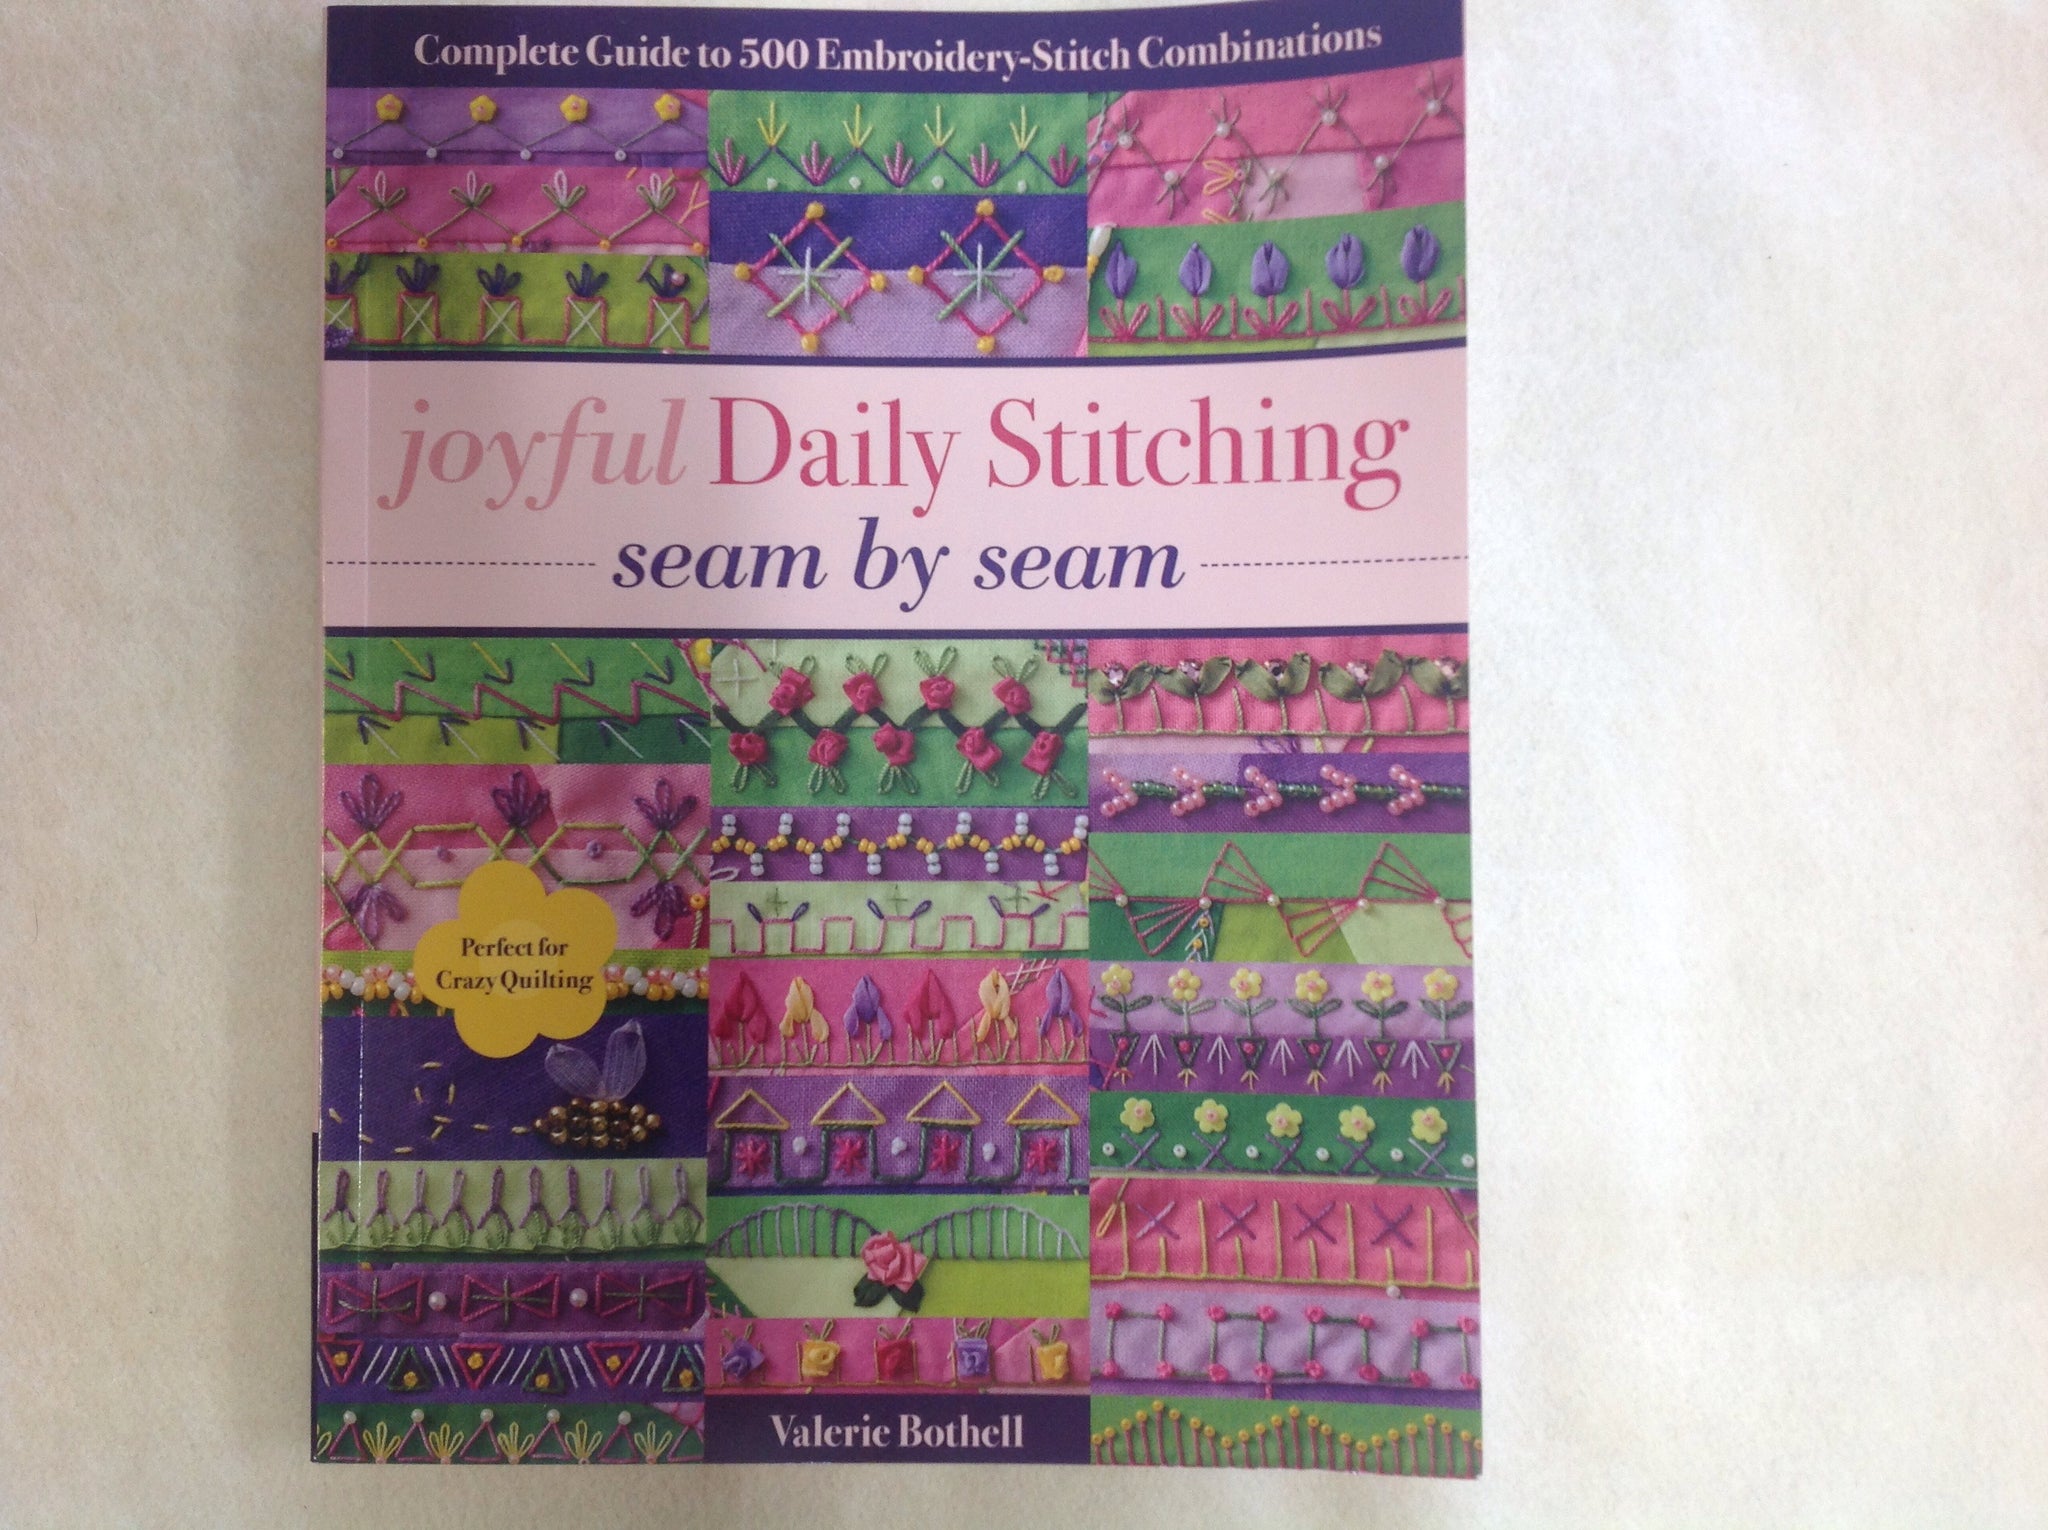 Joyful Daily Stitching by Valerie Bothell